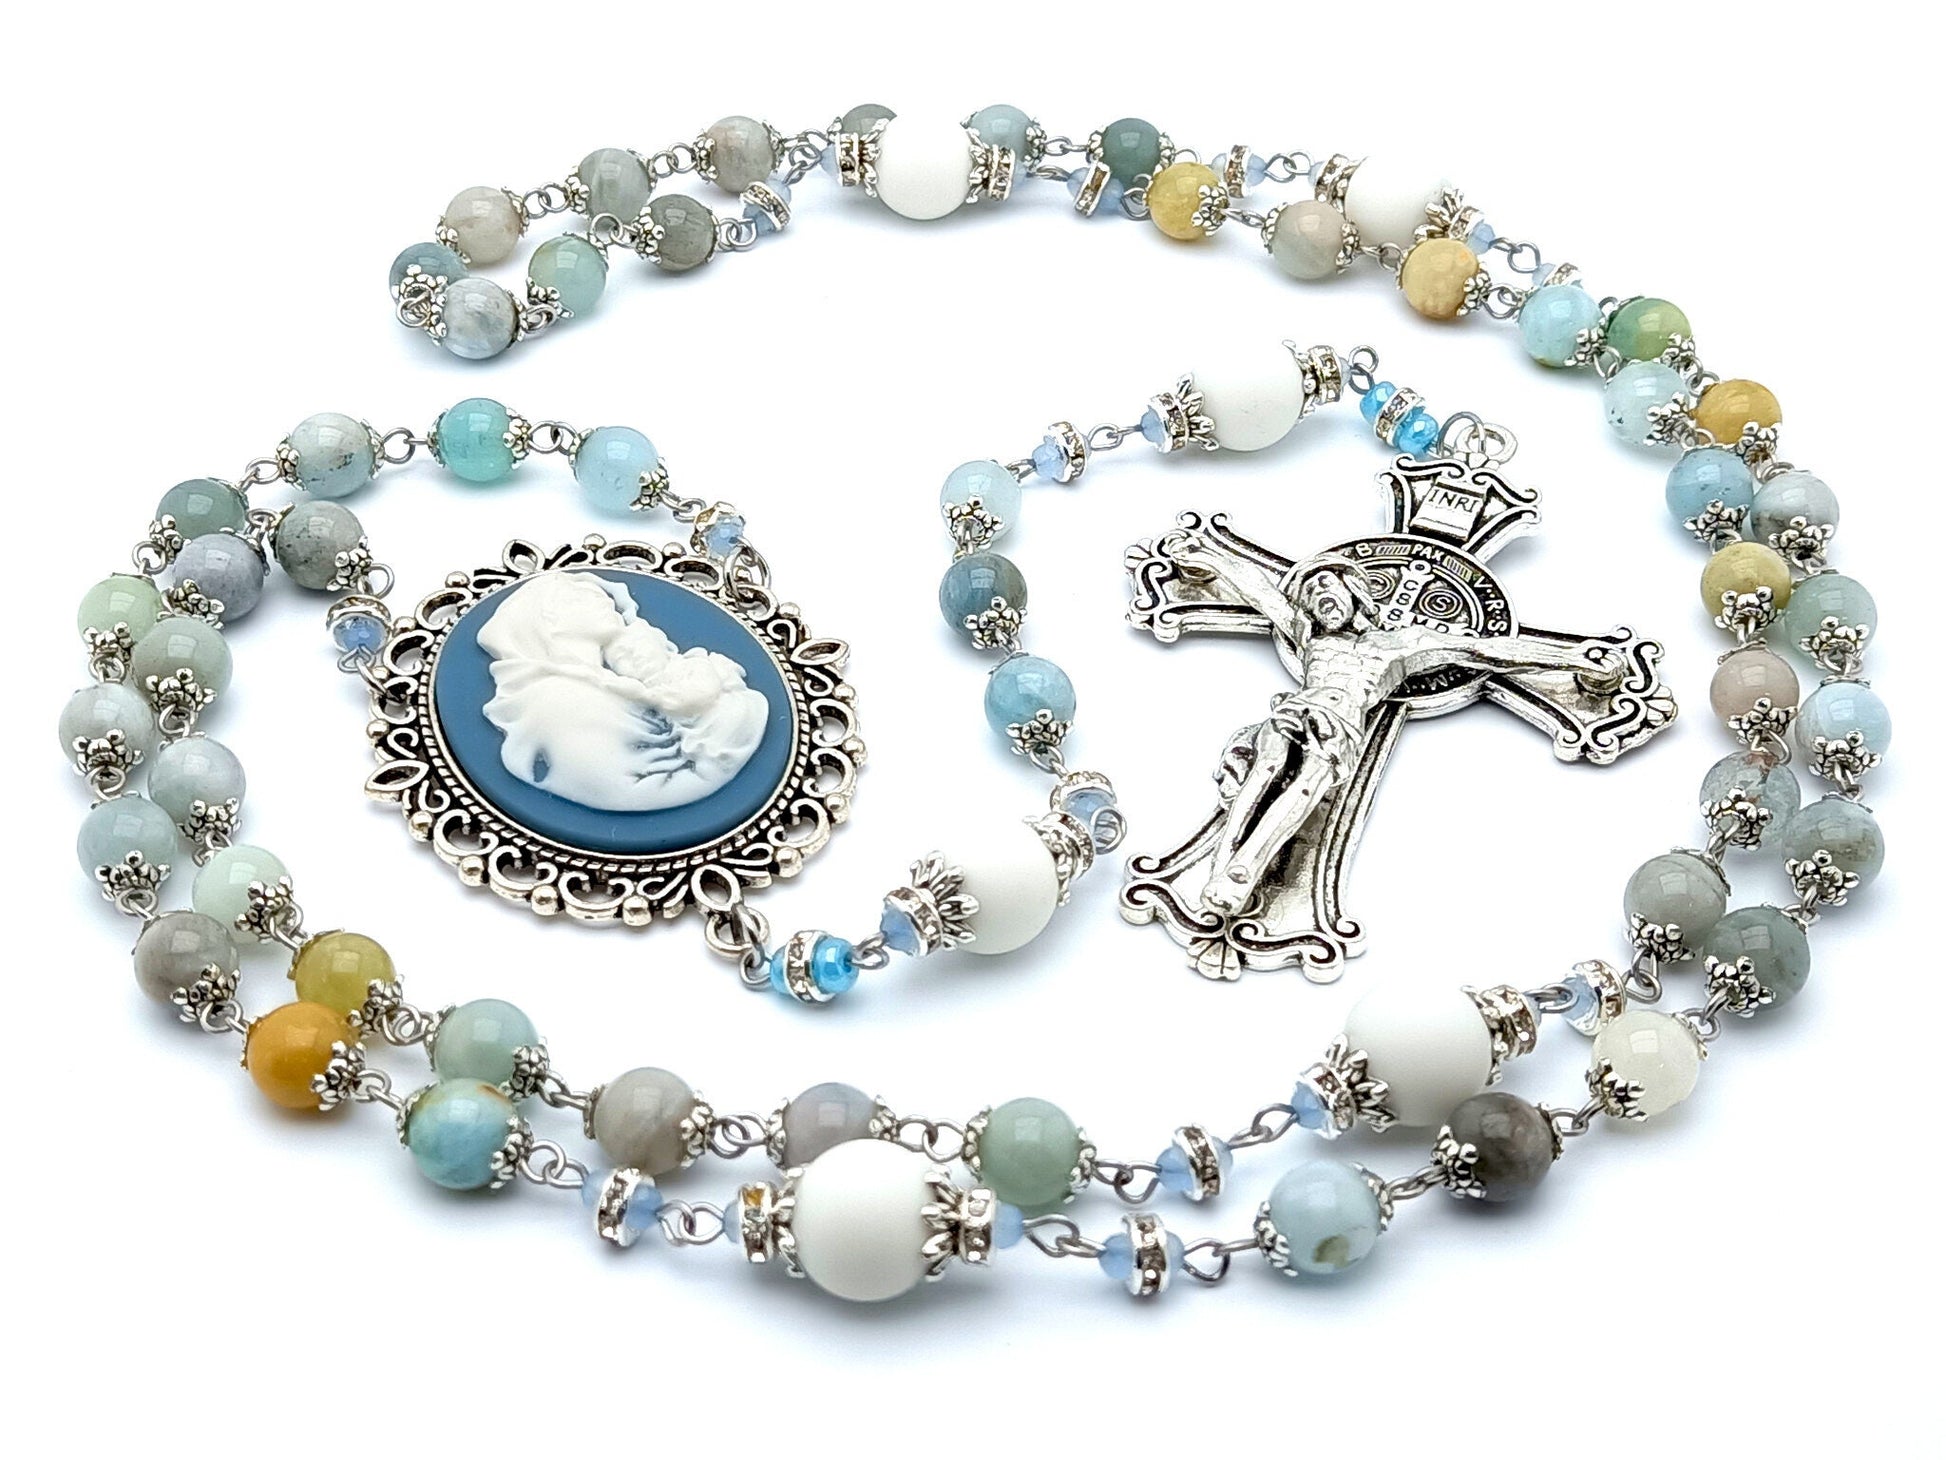 Mary and Jesus cameo unique rosary beads with aquamarine and alabaster gemstone rosary beads and Saint Benedict crucifix.